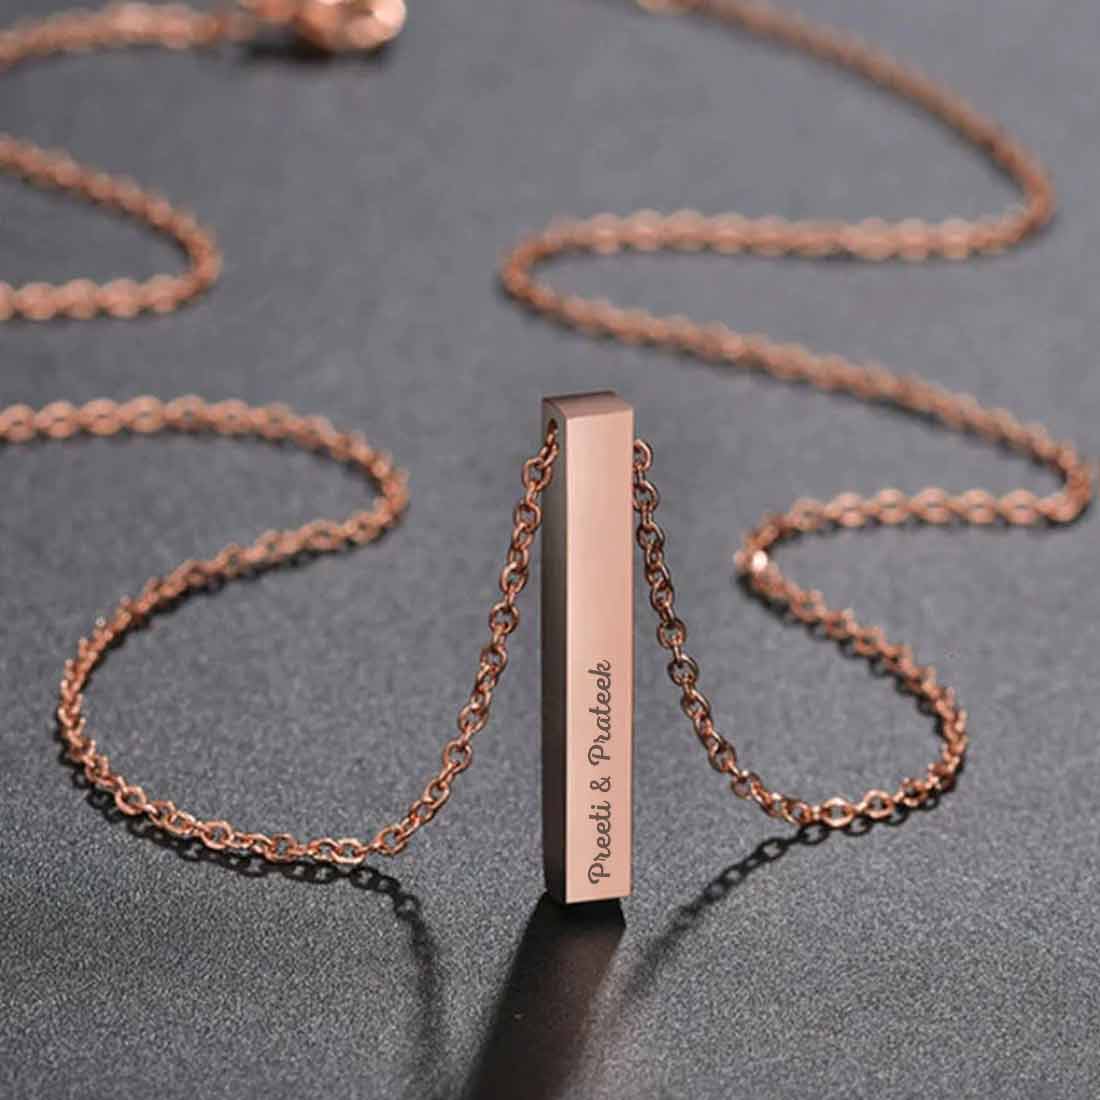 Custom Chain Pendant With Name Engraved Gifts for Birthday Anniversary Valentine Day - Add Name